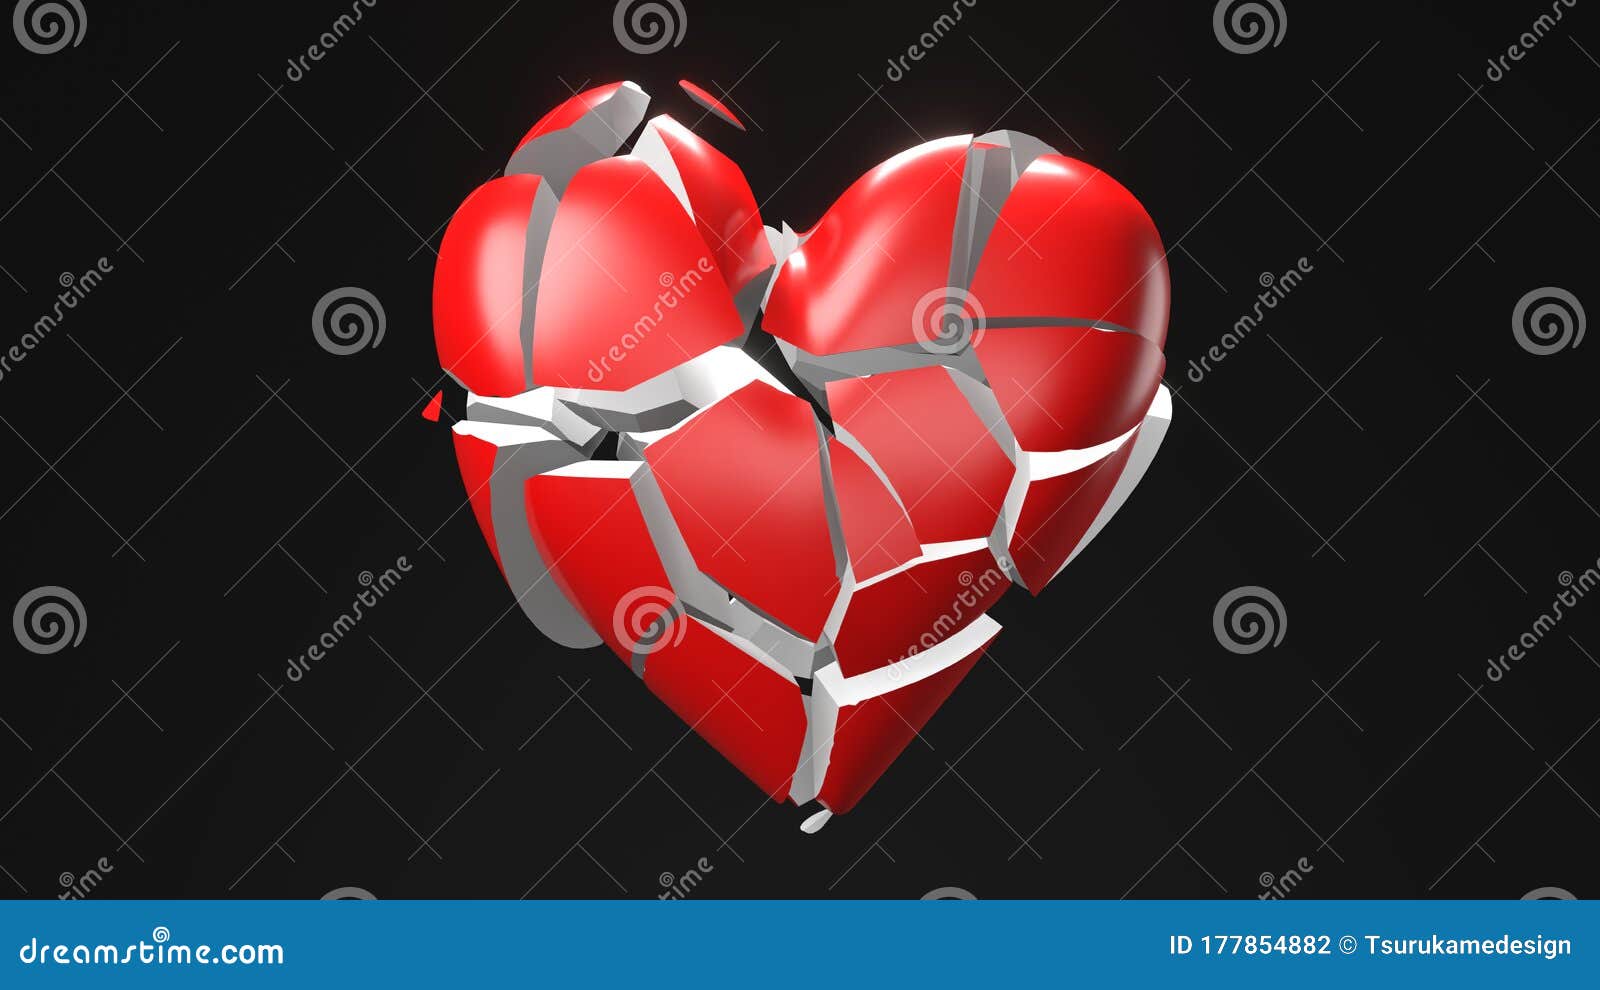 Red Broken Heart Objects in Black Background. Heart Shape Object Shattered  into Pieces. Stock Illustration - Illustration of broken, heart: 177854882